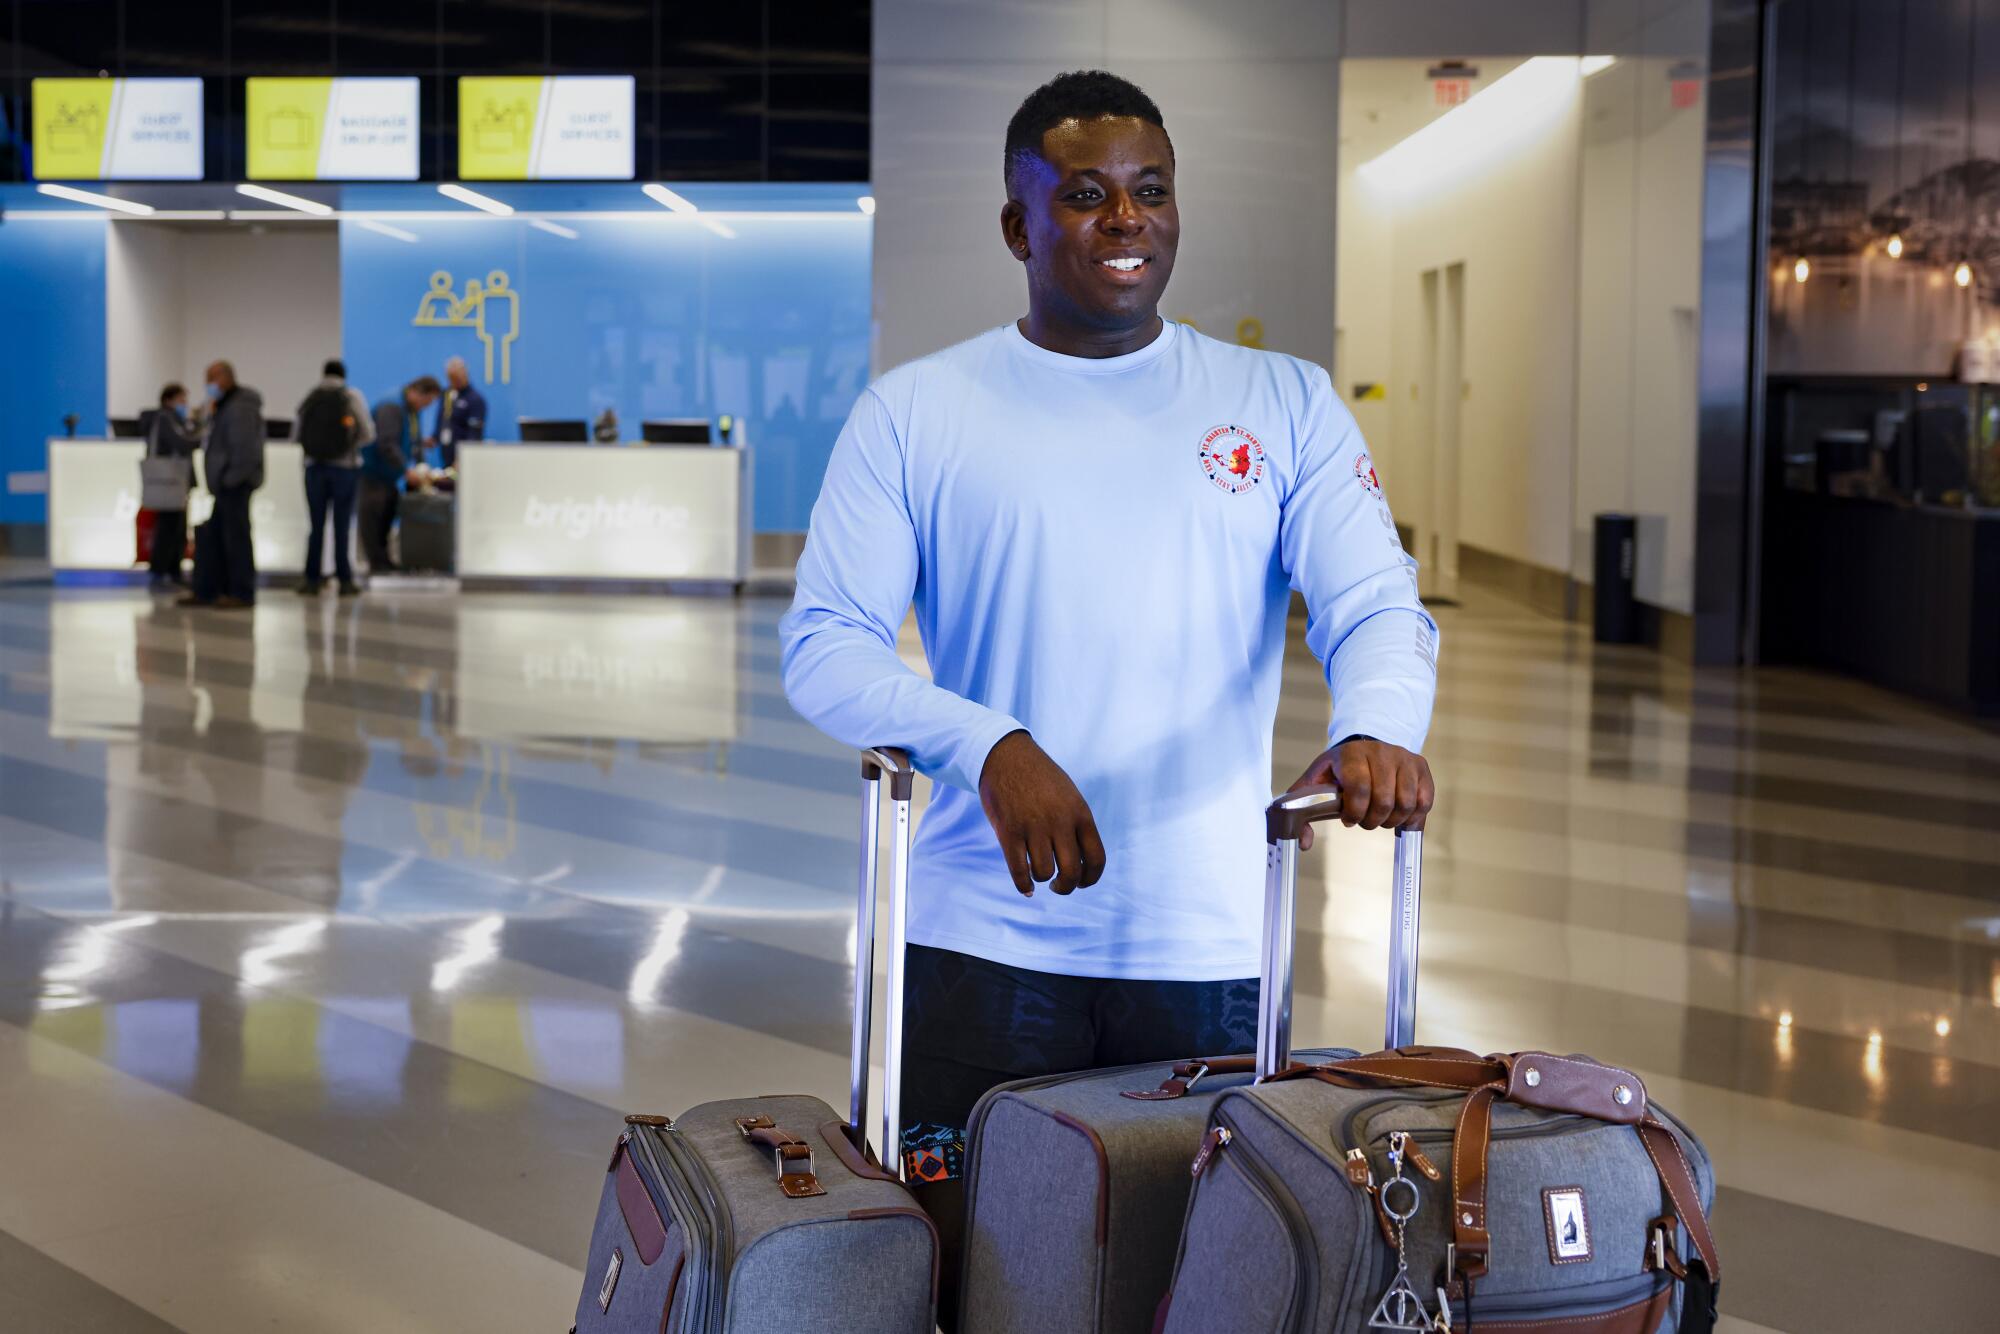 A man in a light blue long-sleeved shirt smiles as he stands with suitcases